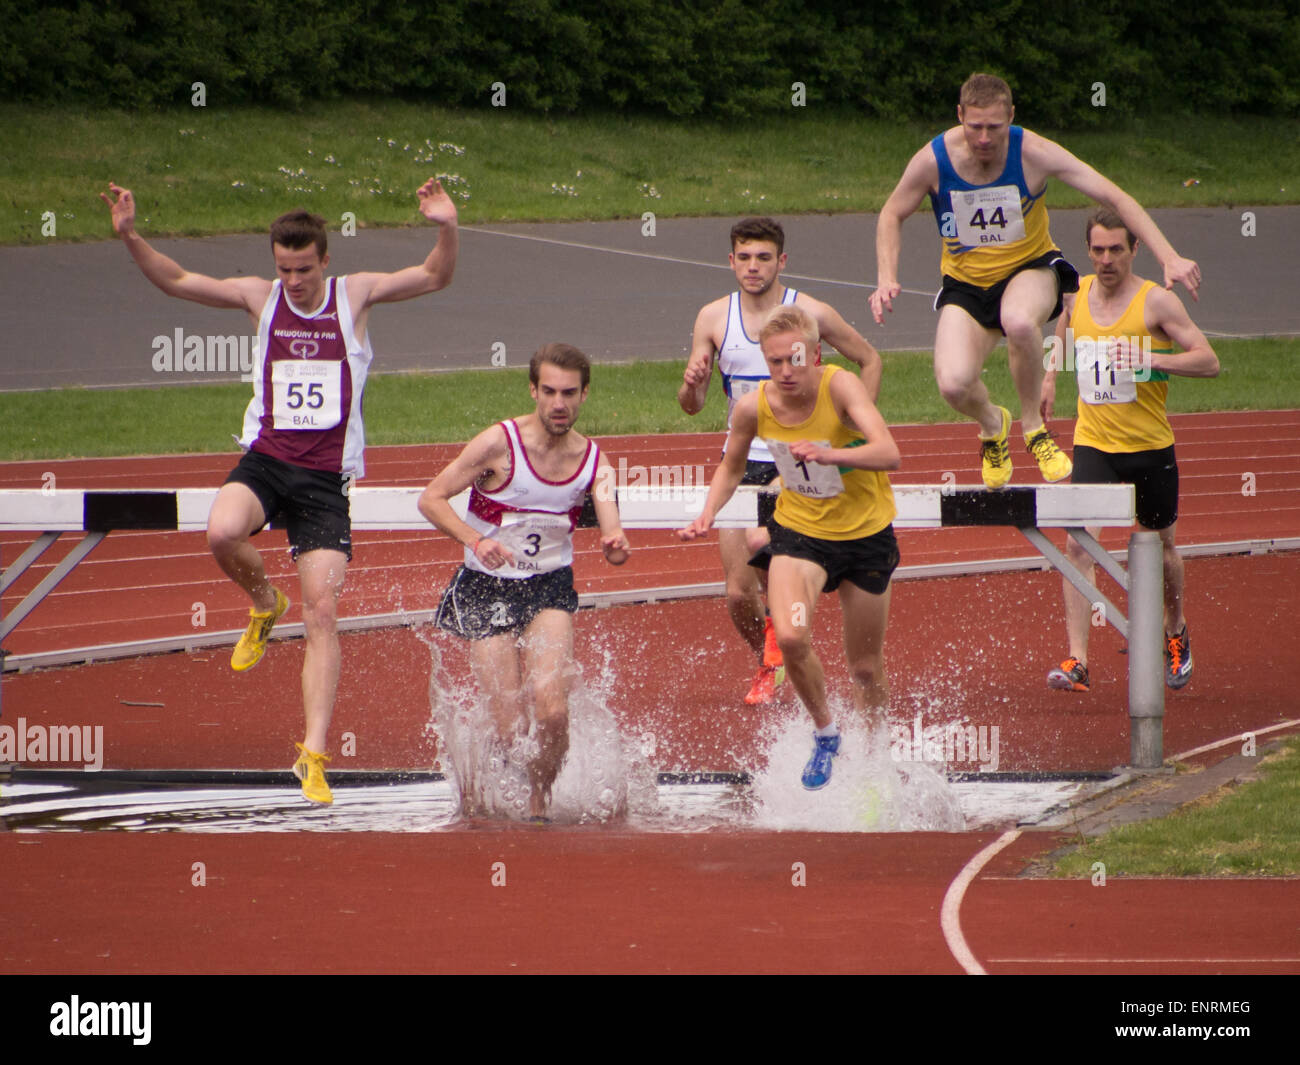 Athletes take on the water jump during a steeplechase race Stock Photo